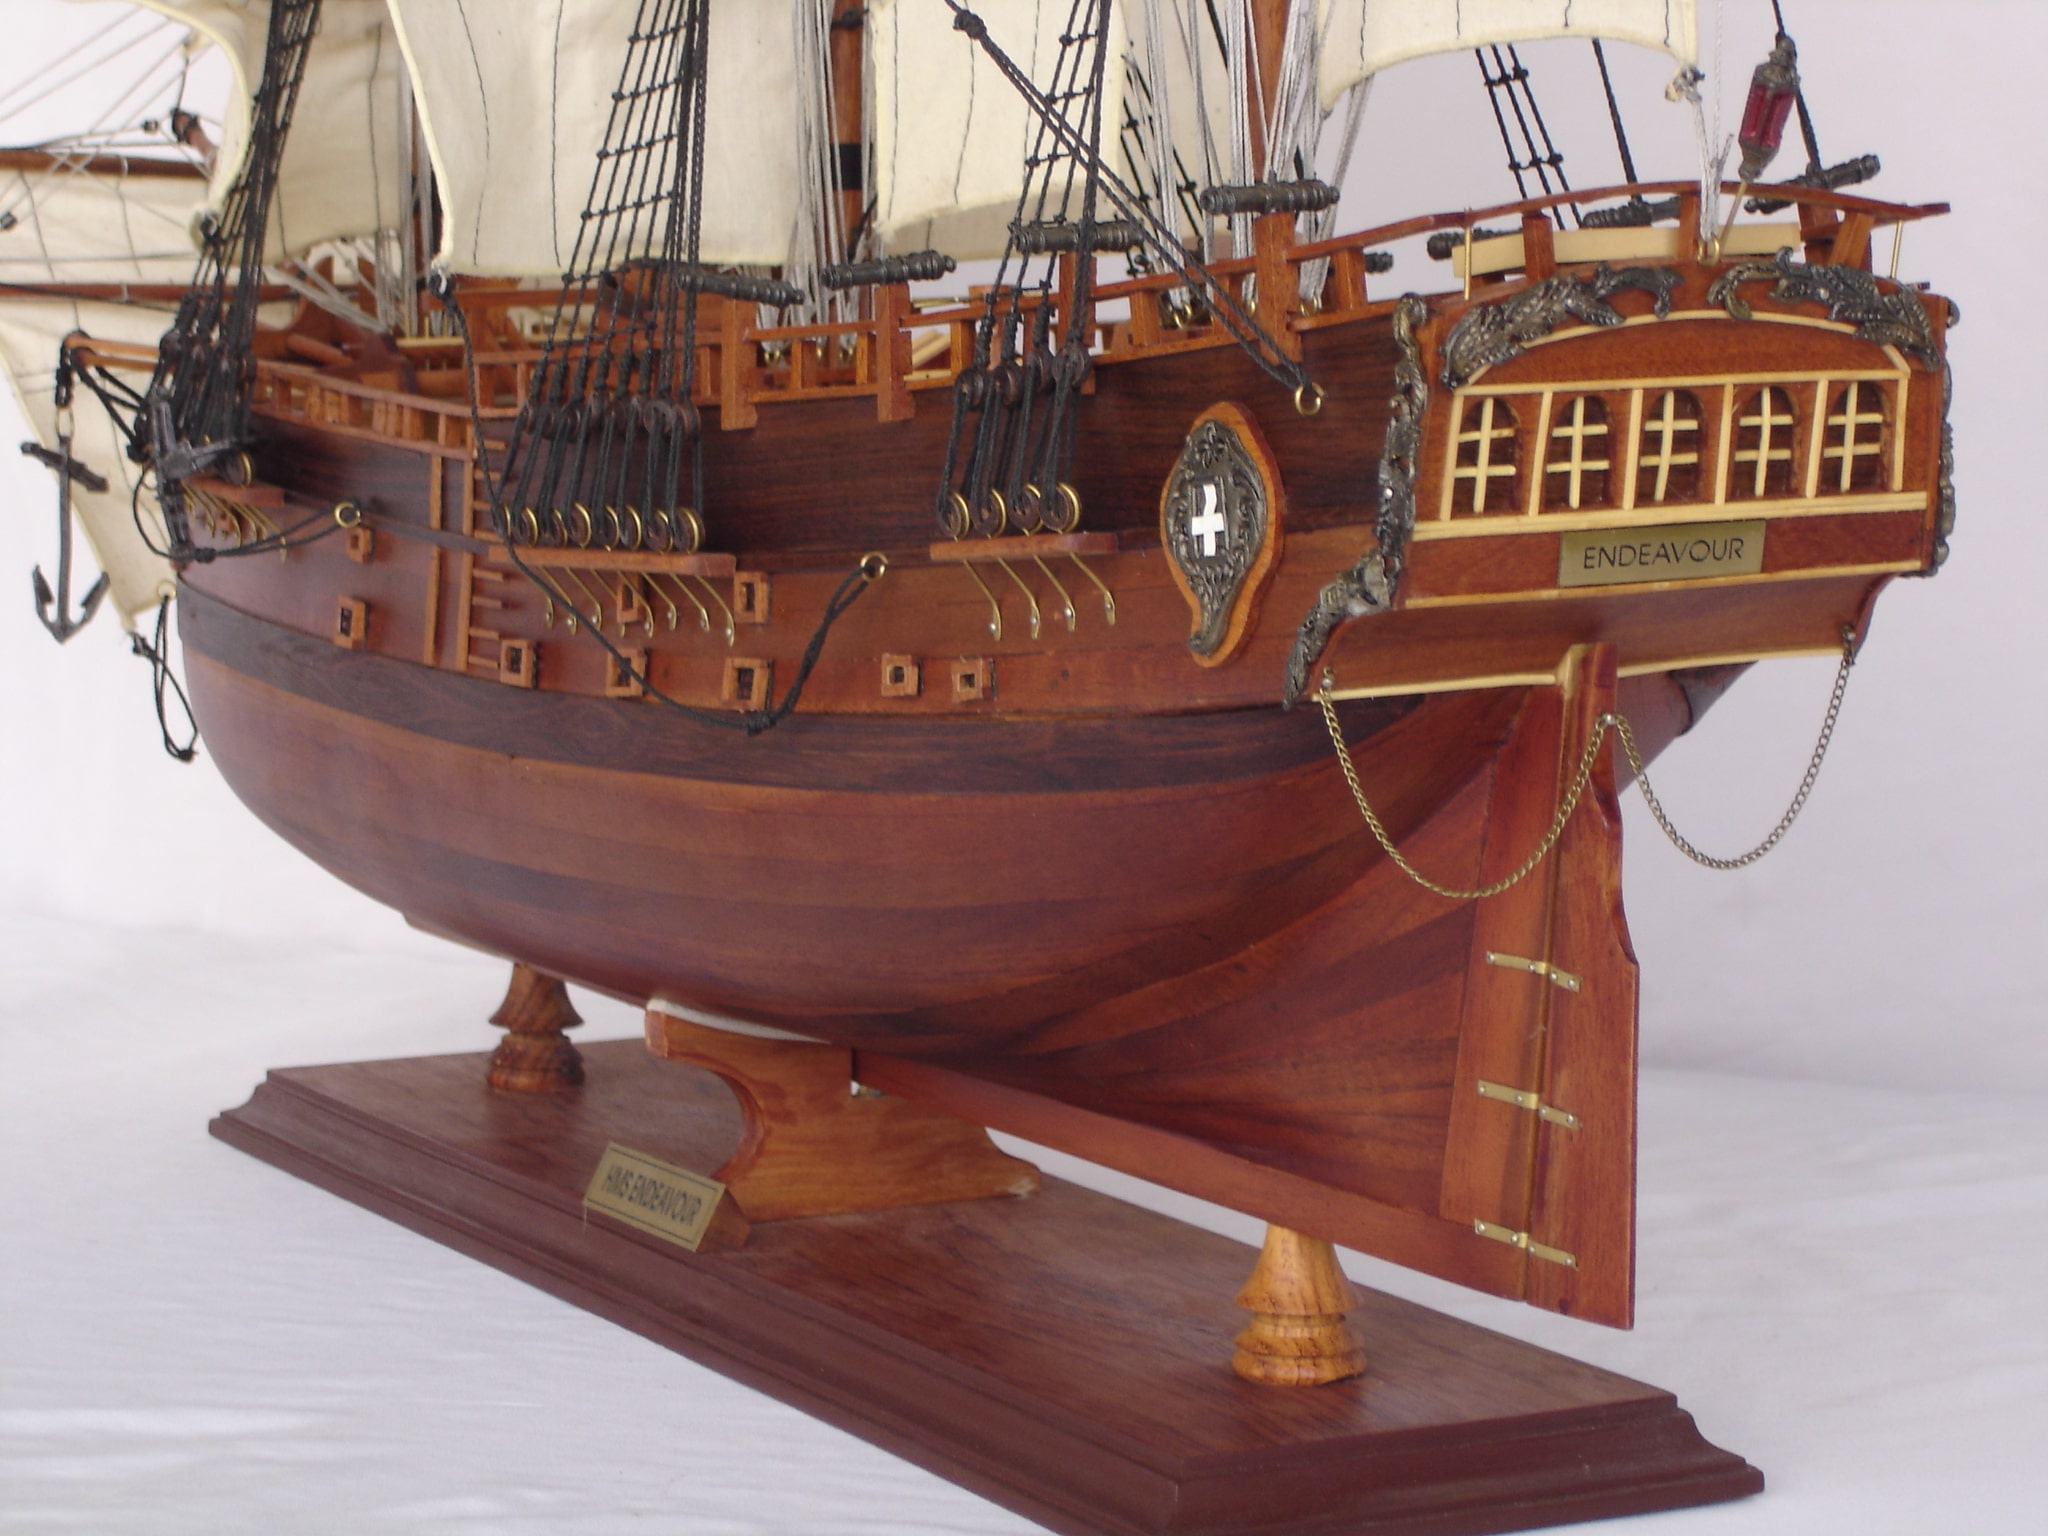 Best Model Ship Kits For Beginners - Image to u